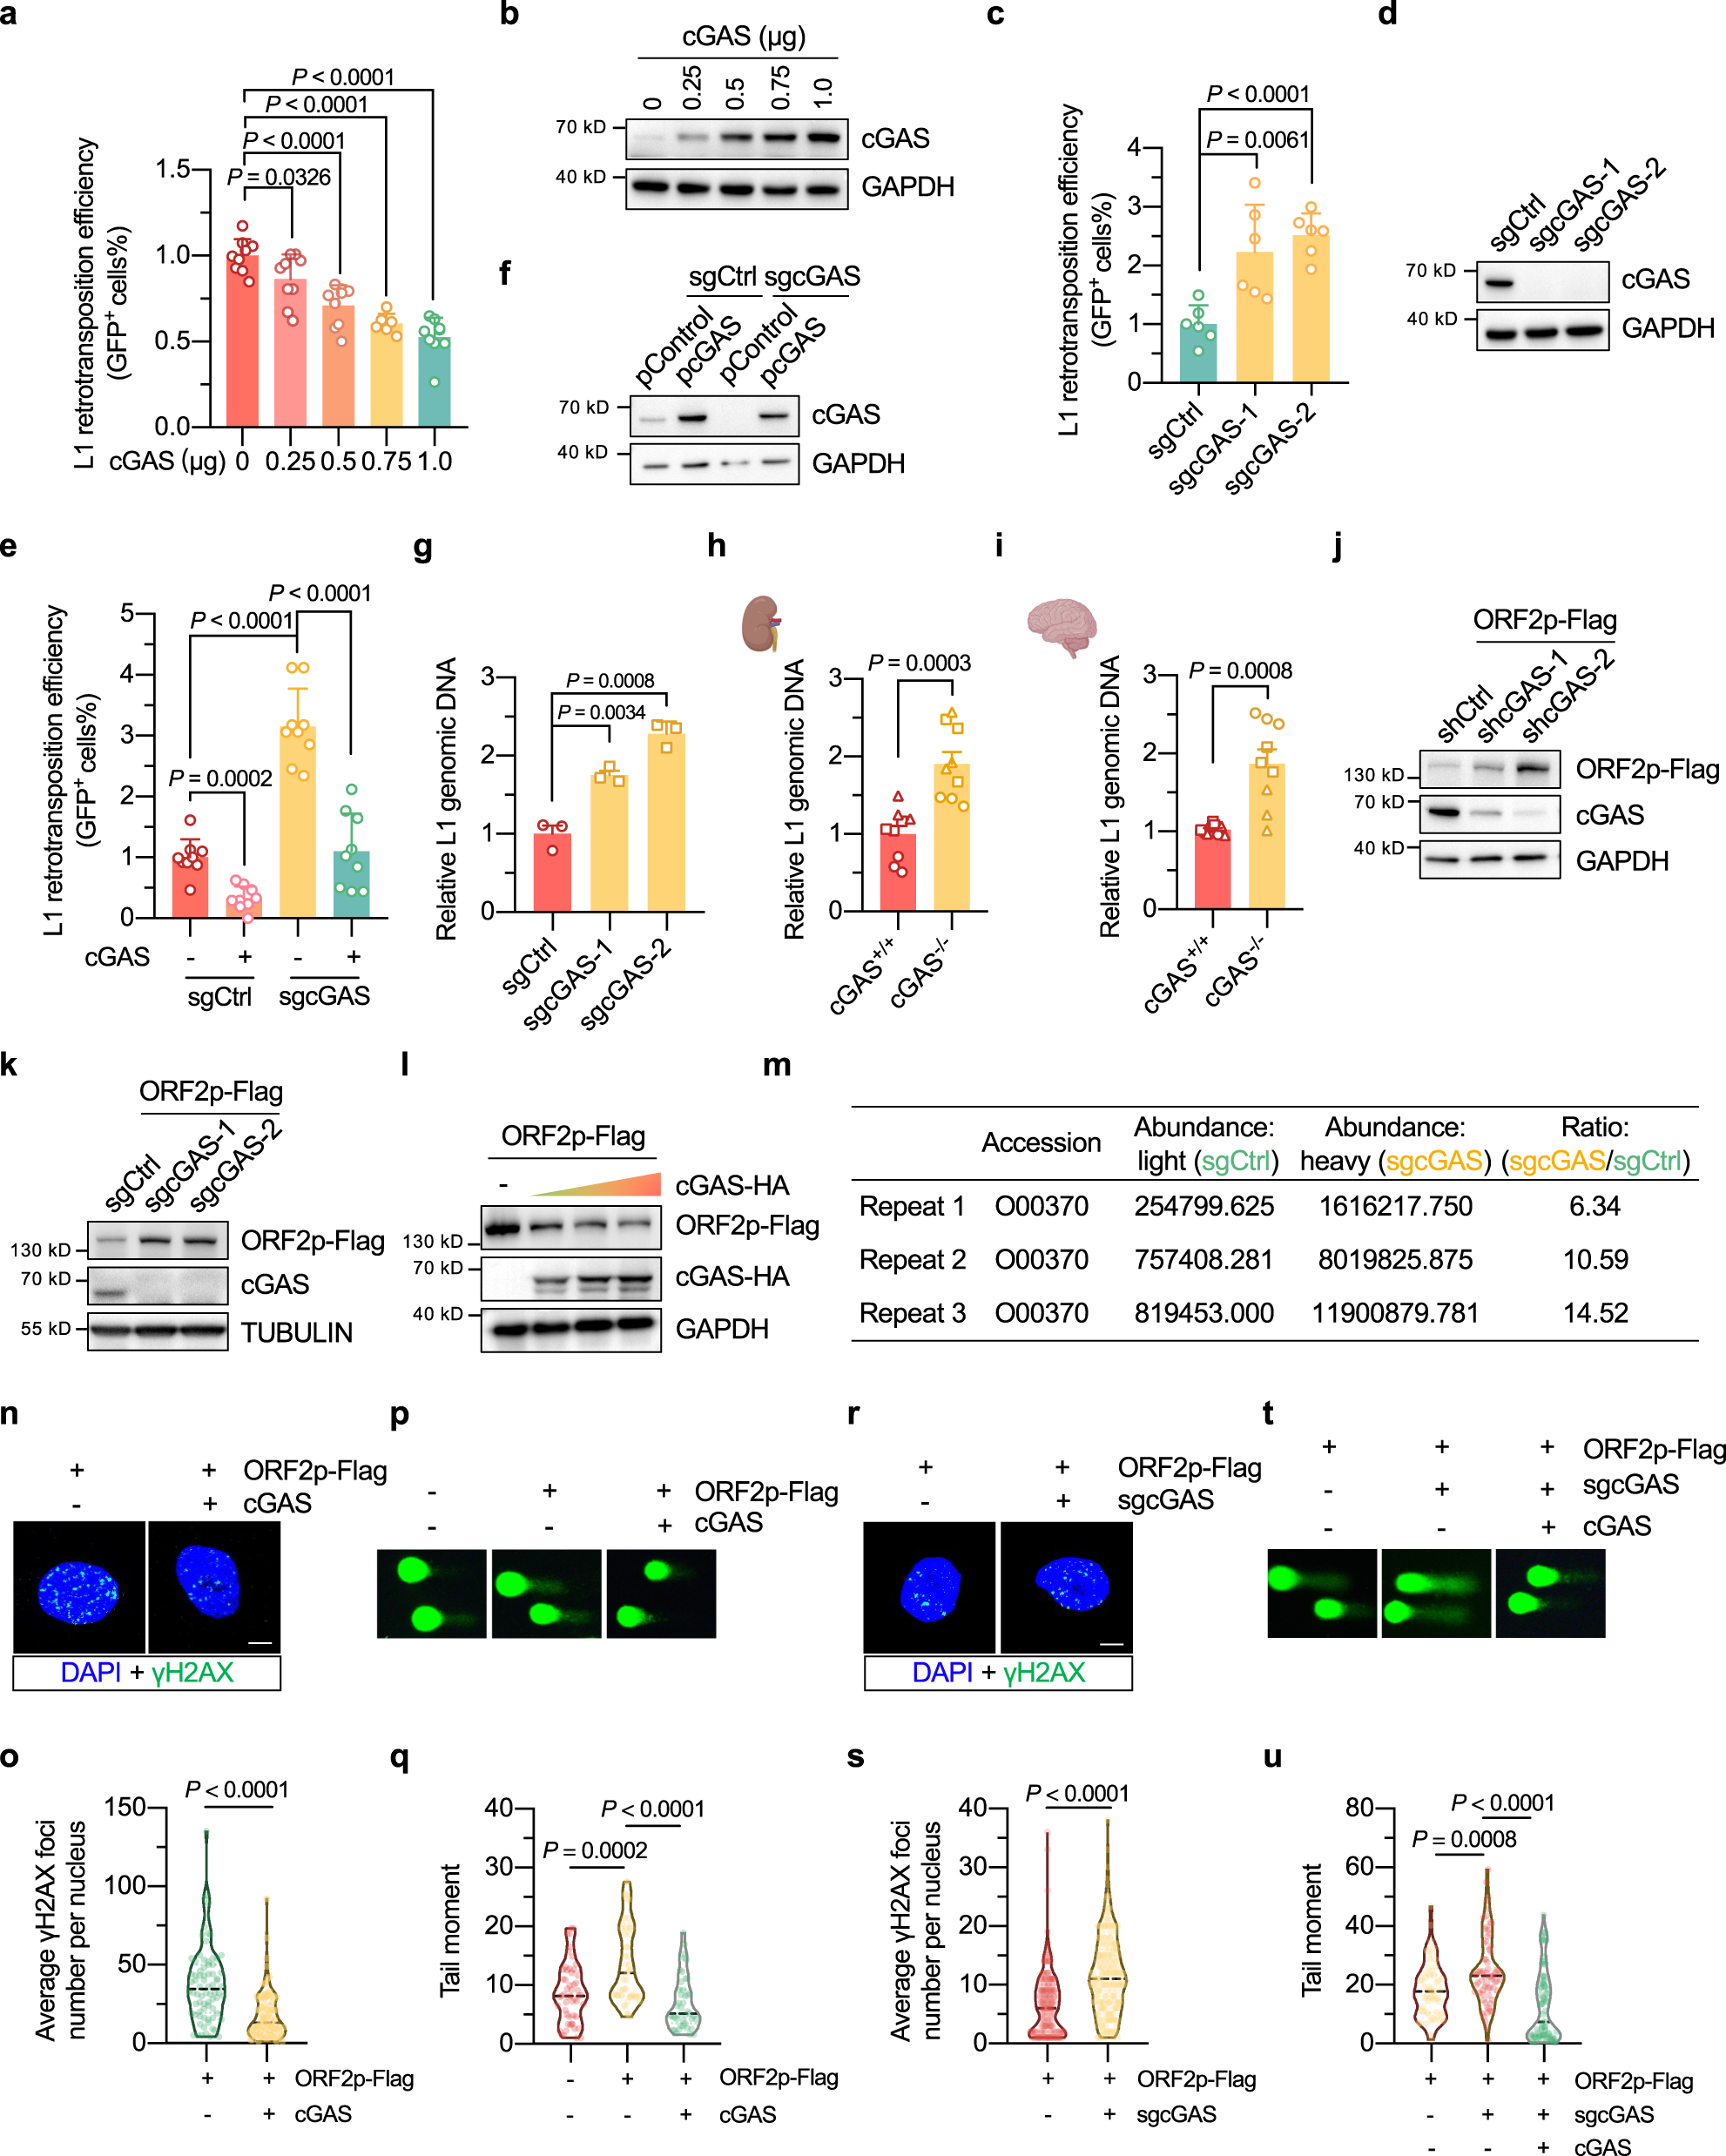 piR-8041 upregulation impacts expression of genes related to cellular